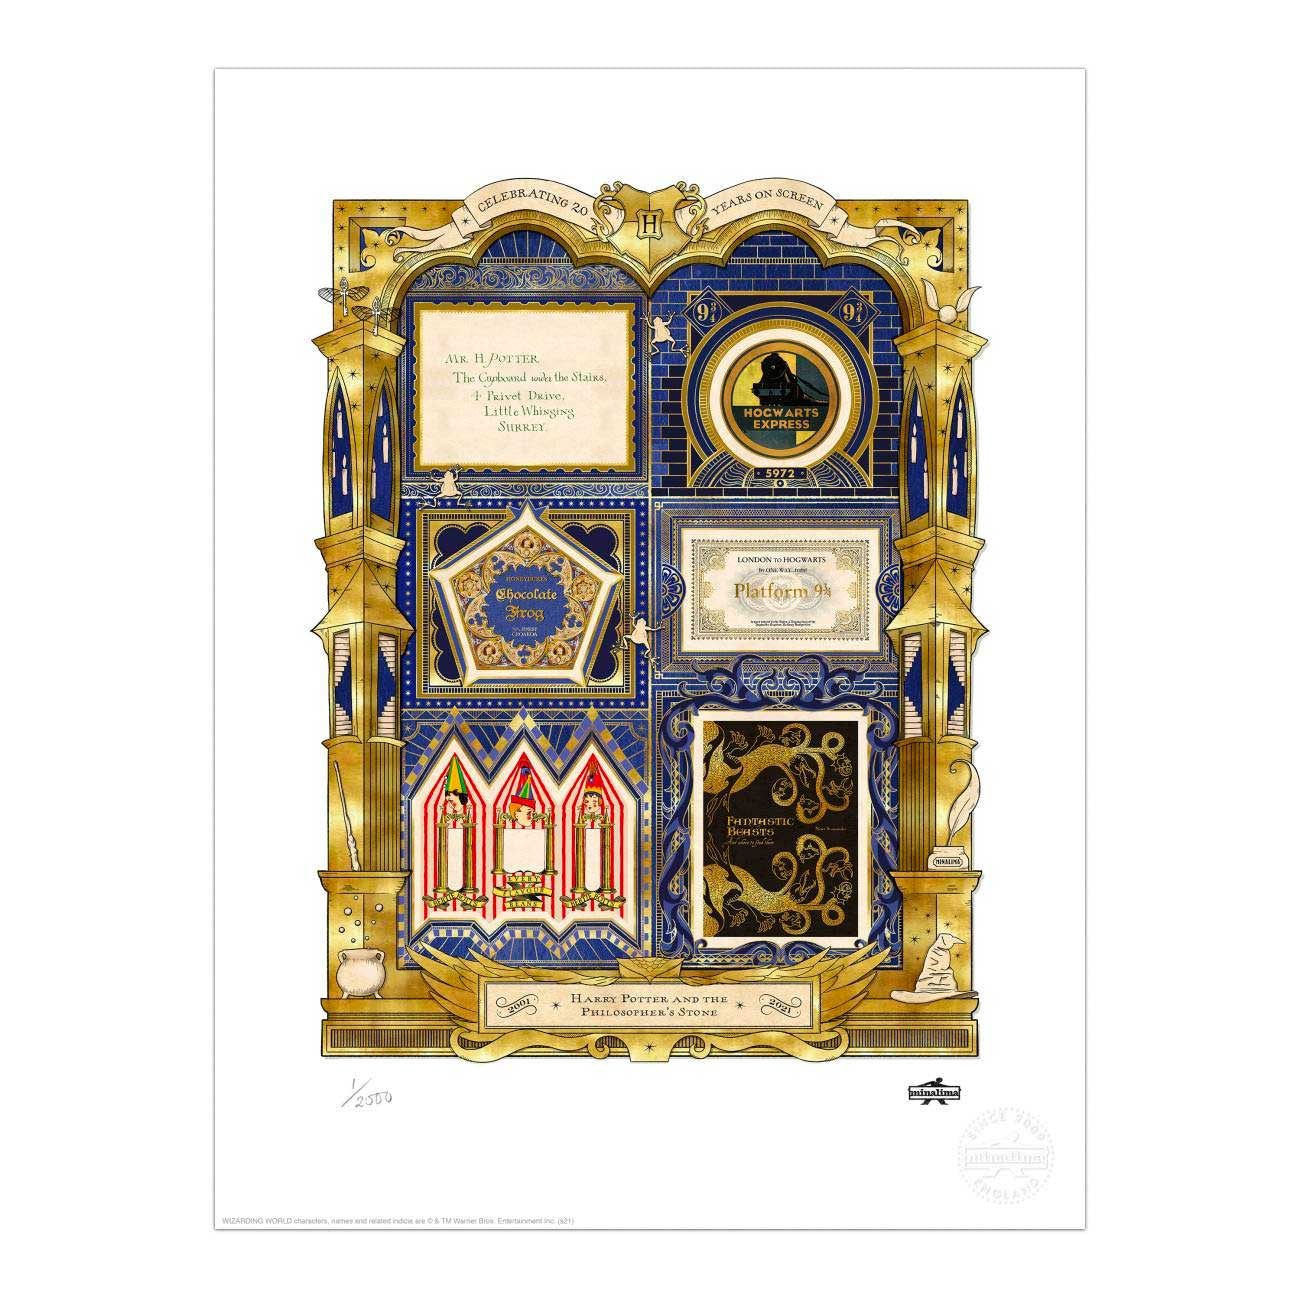 20 Years on Screen: Harry Potter and the Philosopher's Stone Limited Edition Art Print